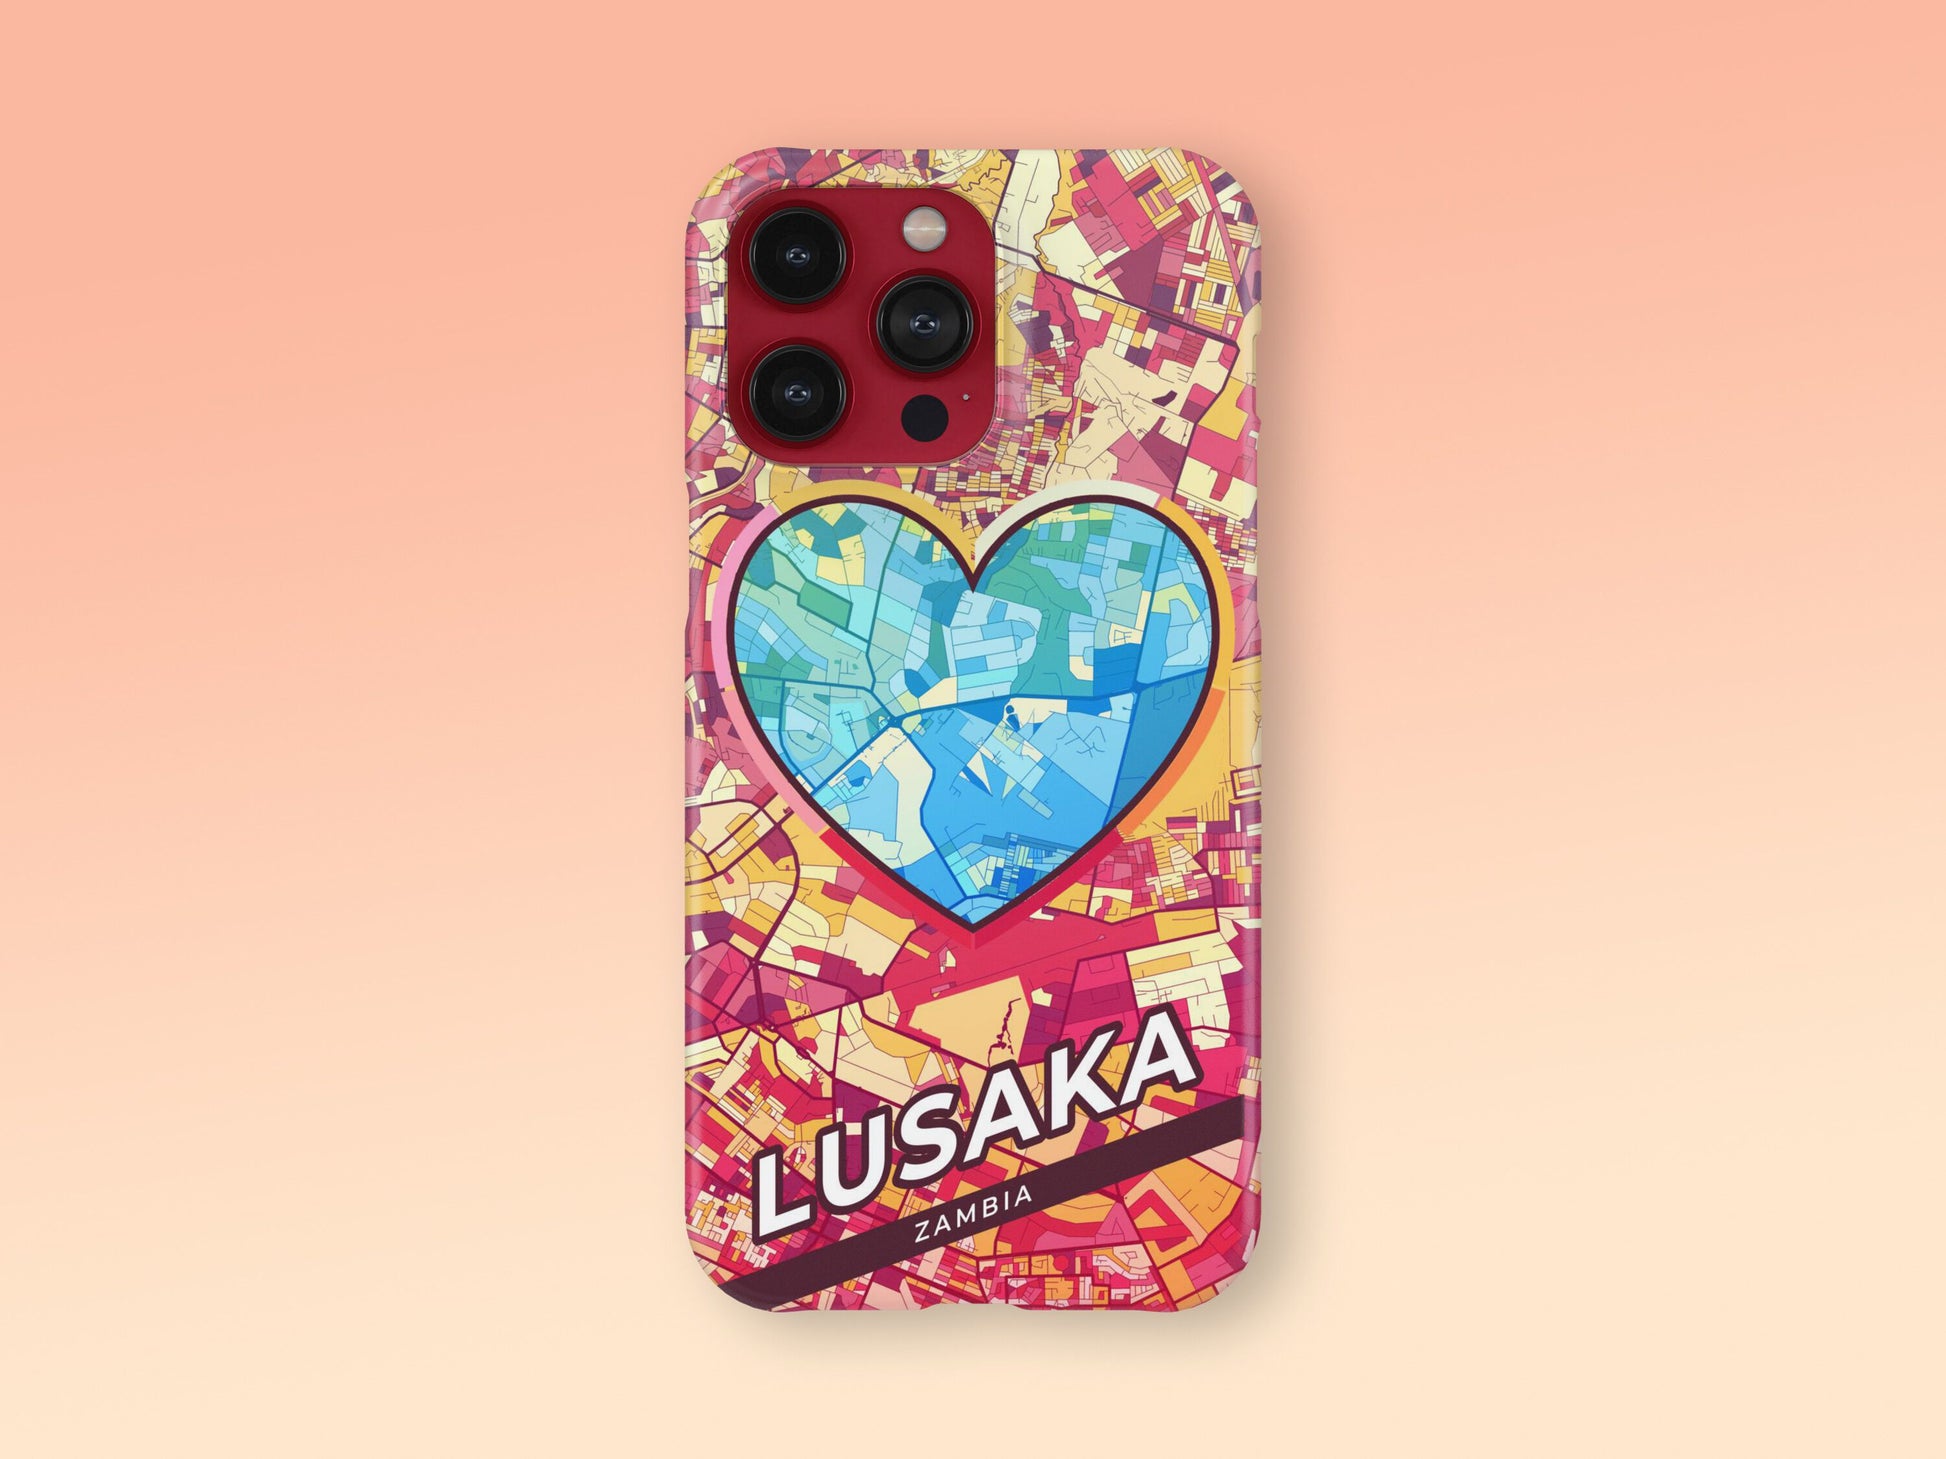 Lusaka Zambia slim phone case with colorful icon. Birthday, wedding or housewarming gift. Couple match cases. 2